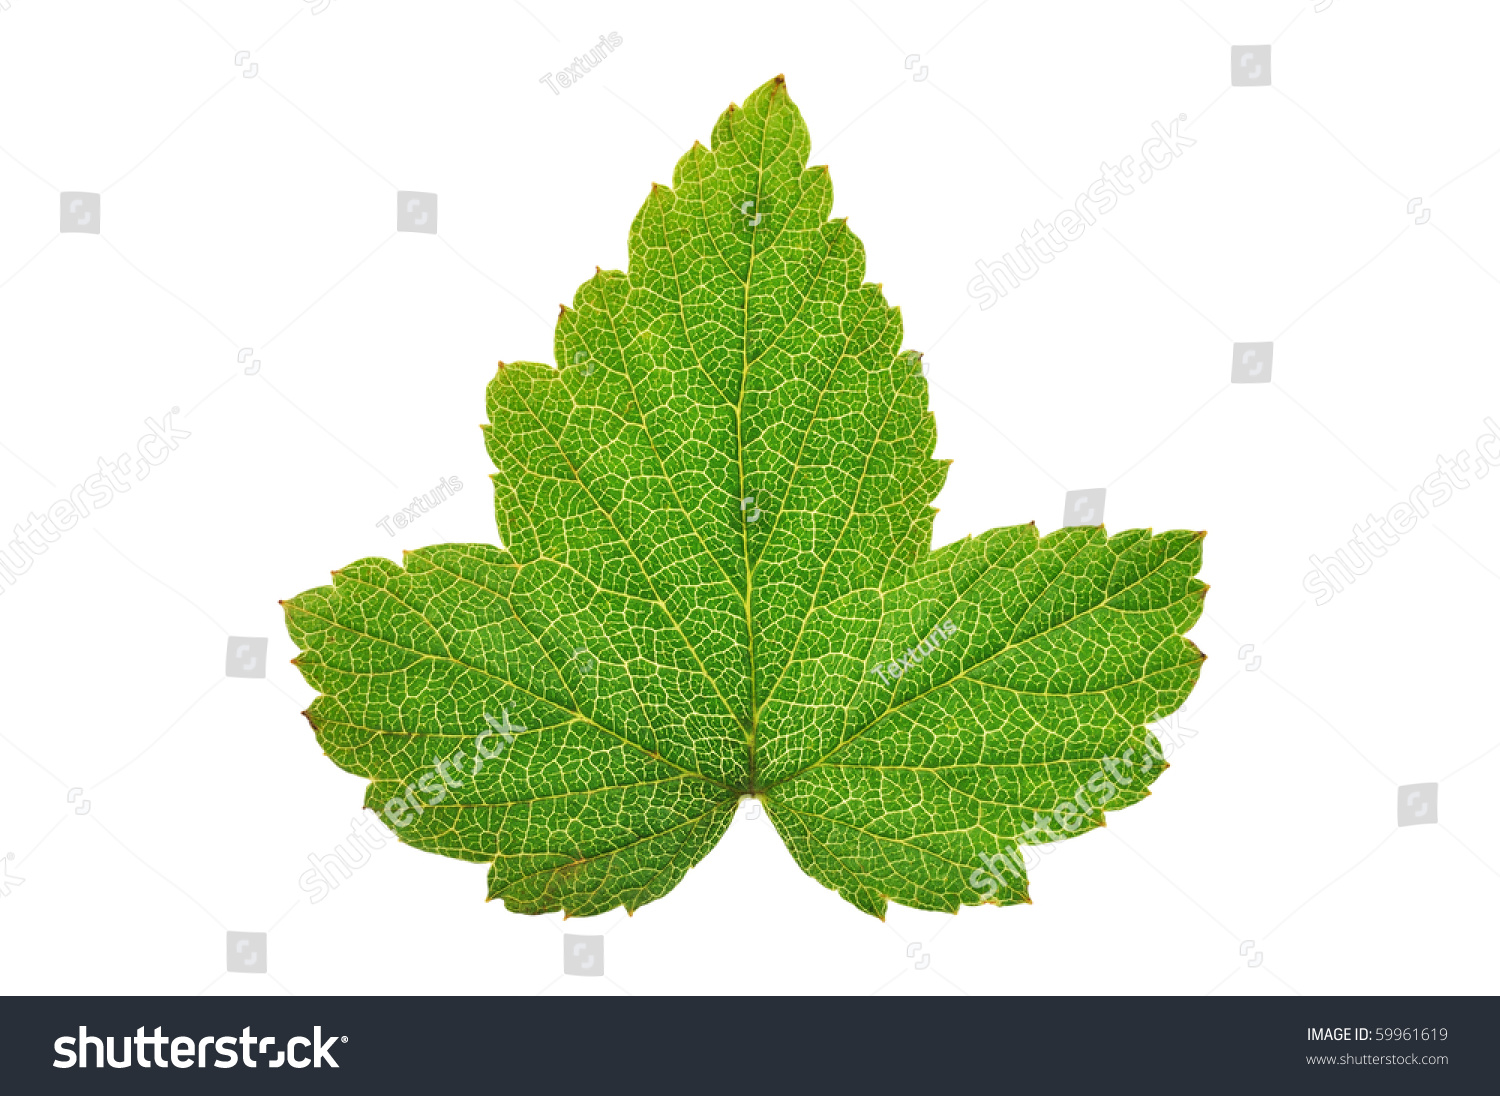 Currant leaf isolated on white background #59961619